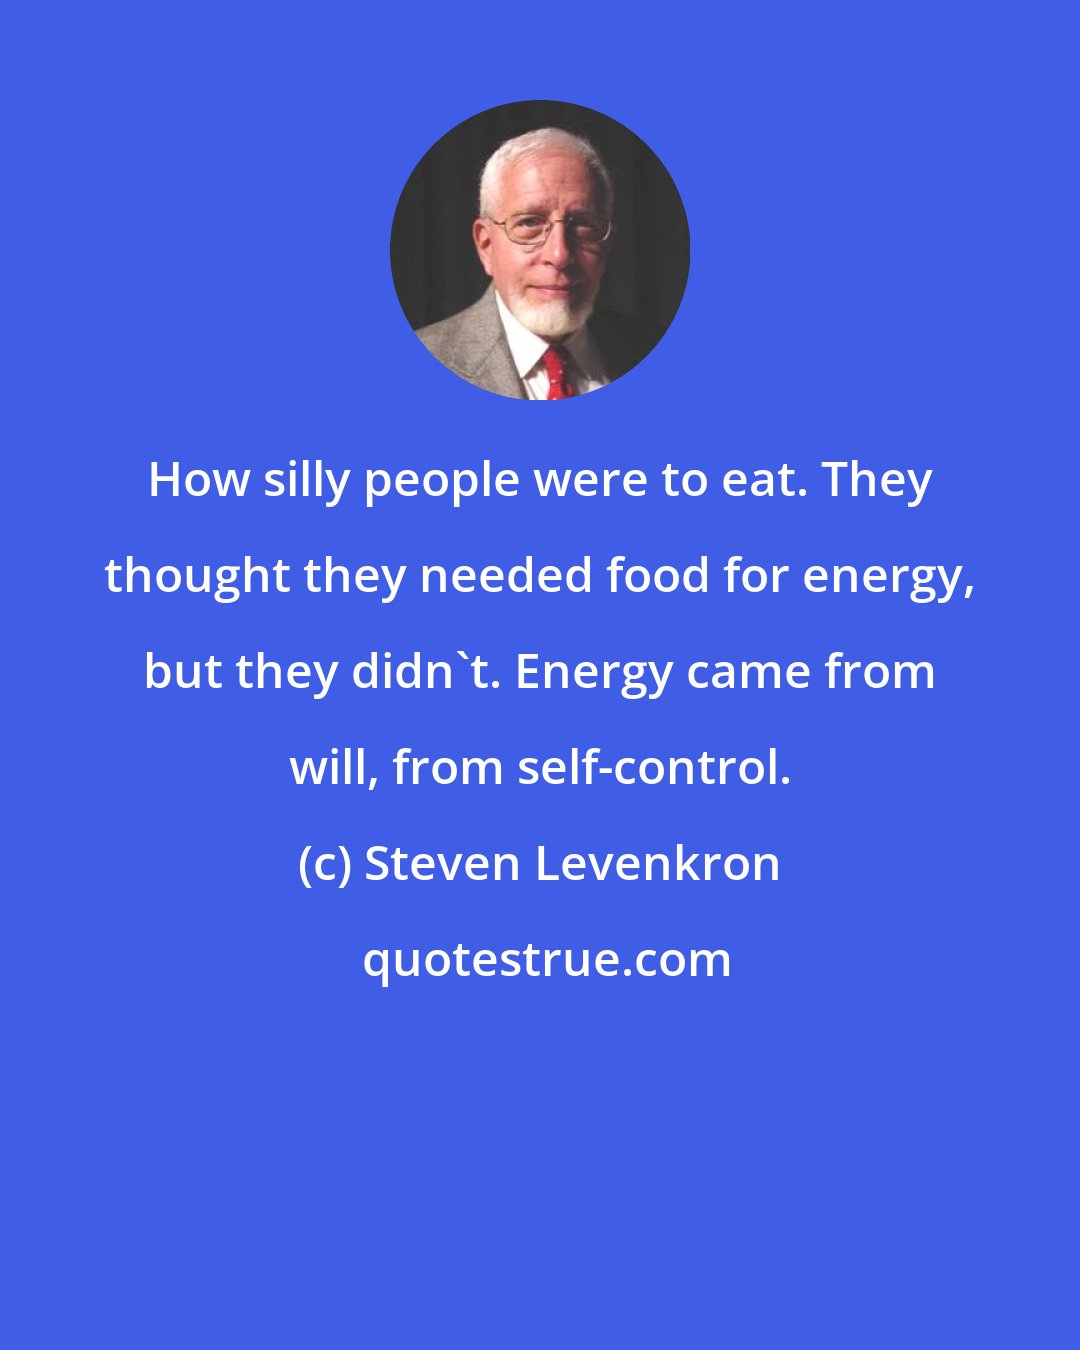 Steven Levenkron: How silly people were to eat. They thought they needed food for energy, but they didn't. Energy came from will, from self-control.